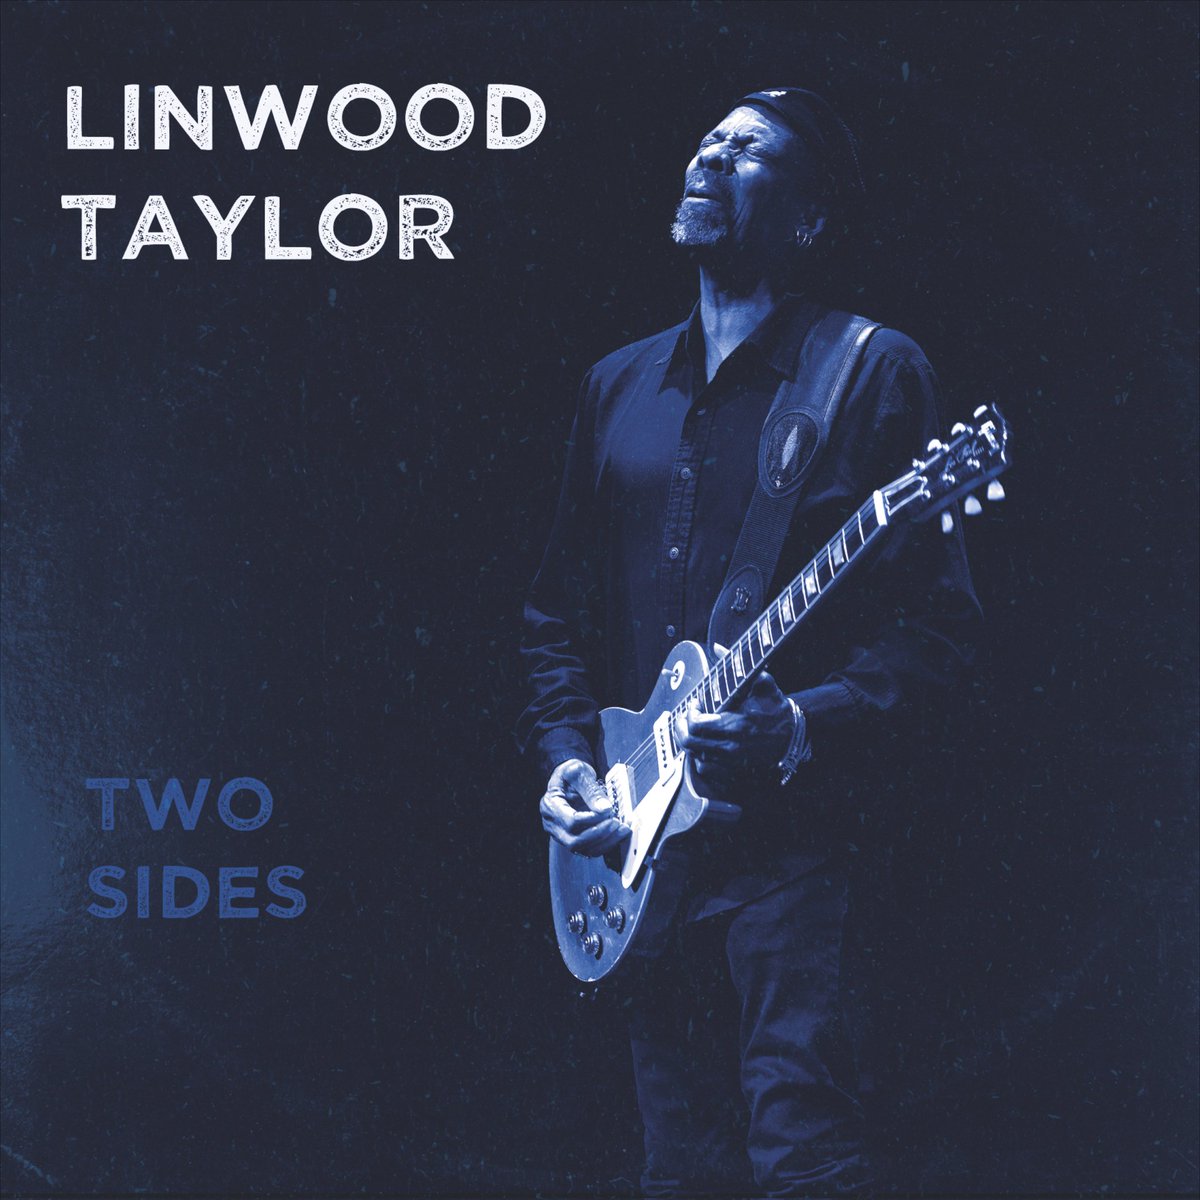 Thanks @WPFW DC for spreading great music & news!
Thanks #DontForgetTheBlues for spinning #LinwoodTaylor (w @SolRoots) songs alongside @GovtMuleBand @MphsGold #EarlHooker @TinsleyEllis #IrmaThomas  @Danielle_Nicole @A5BluesBand @ZitoRox #BobbyParker @WalterTrout @JJGREYandMOFRO &